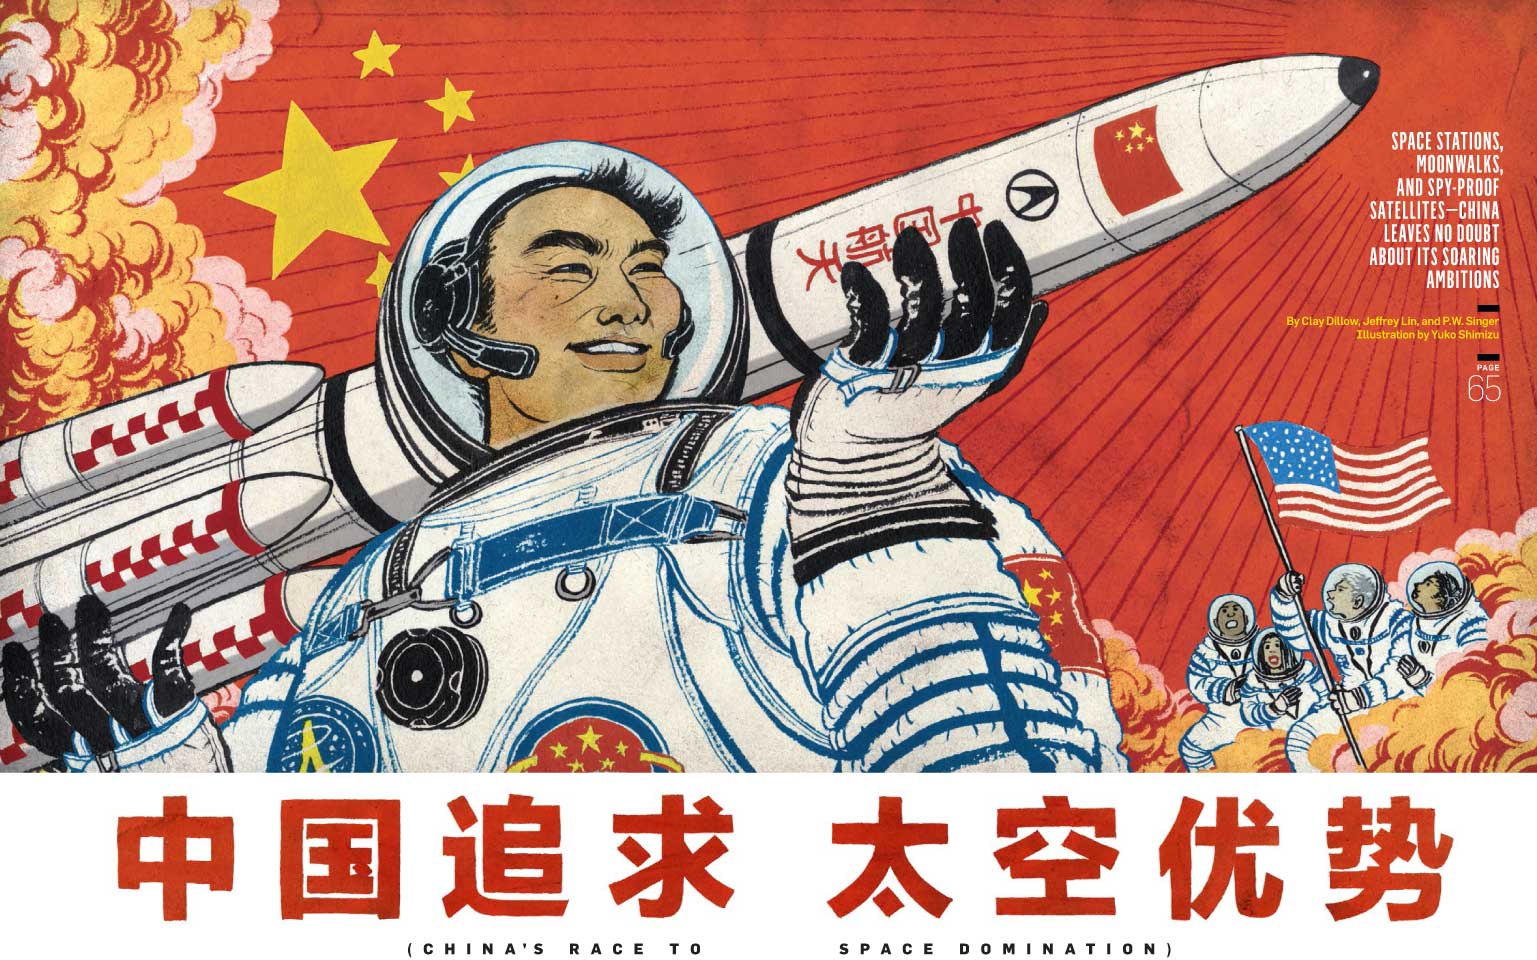 Chinese propaganda poster from the 80's about the space quest